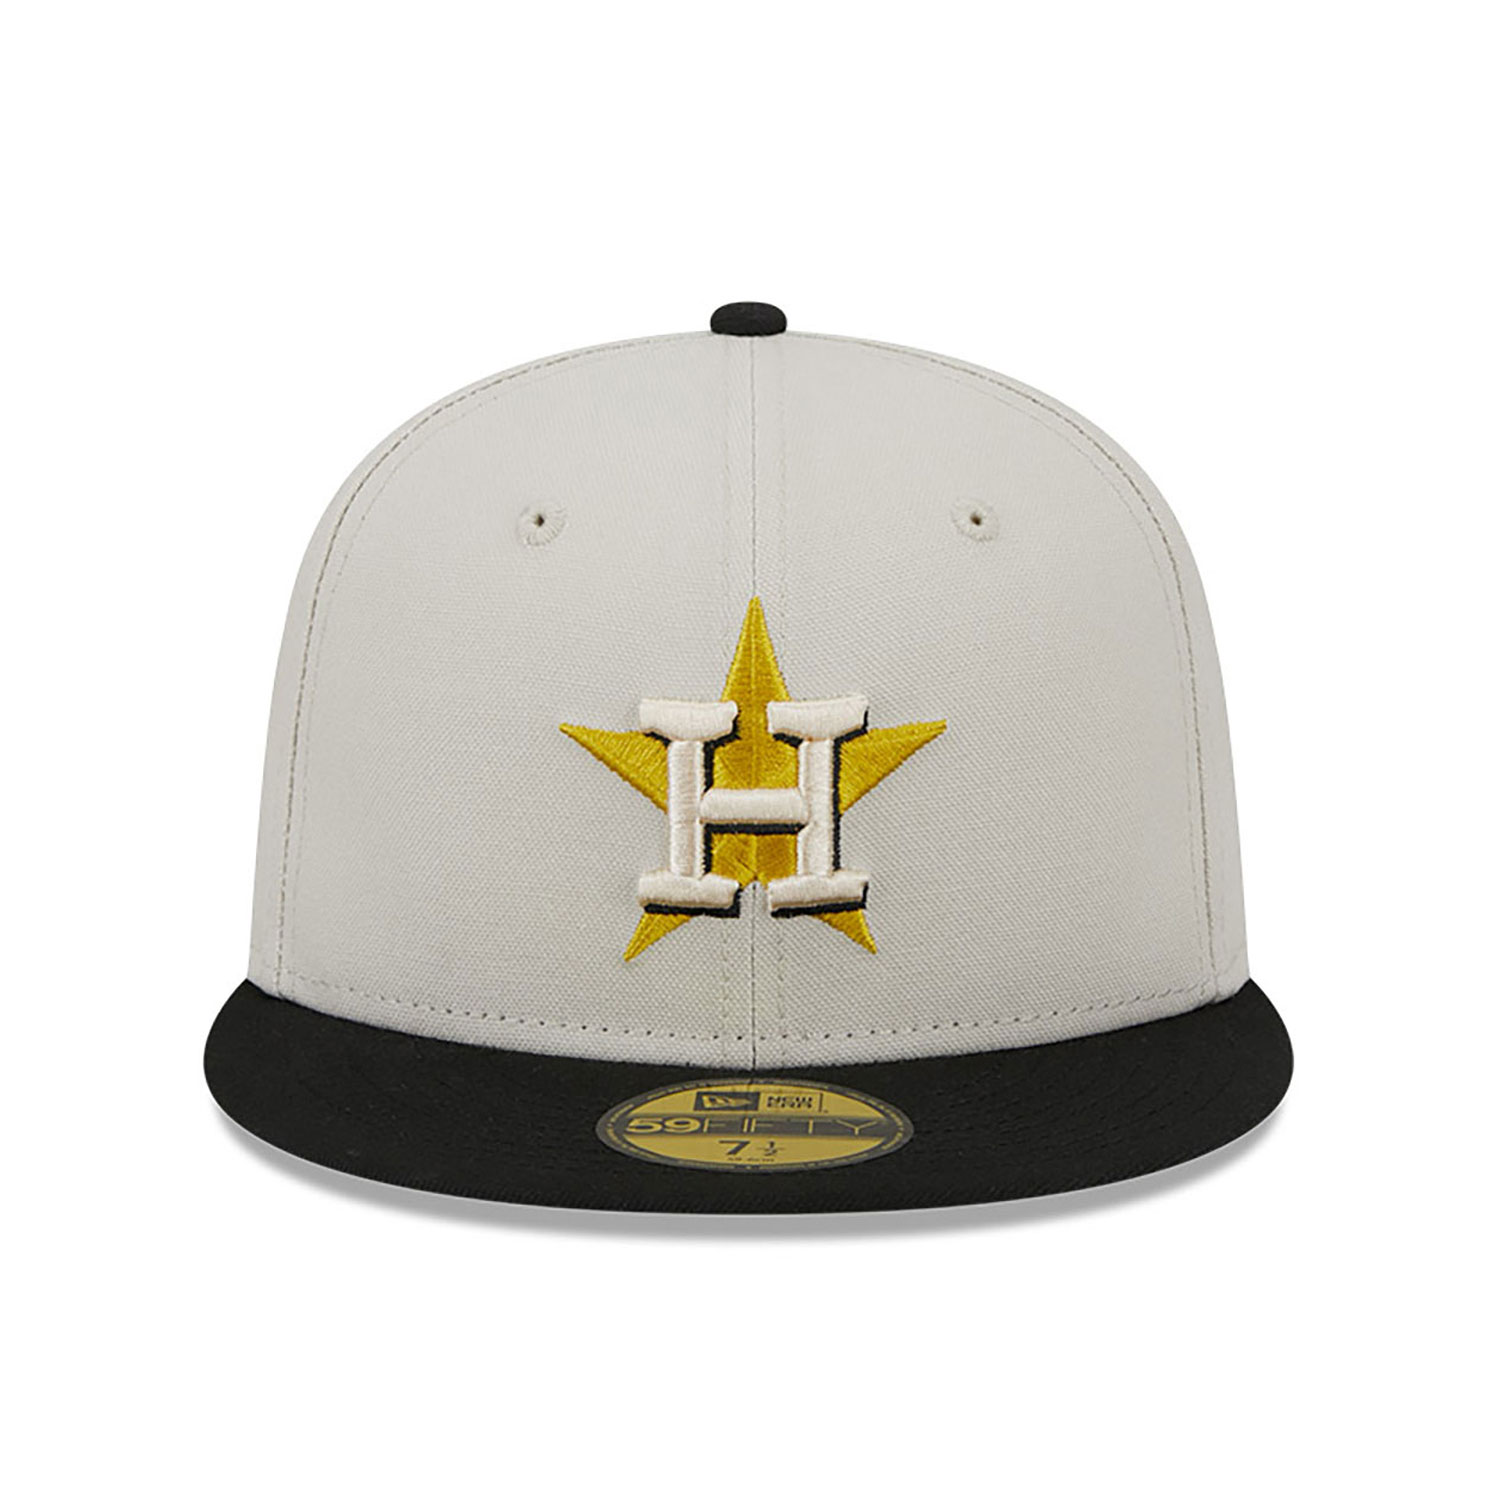 Houston Astros Two-Tone Stone 59FIFTY Fitted Cap